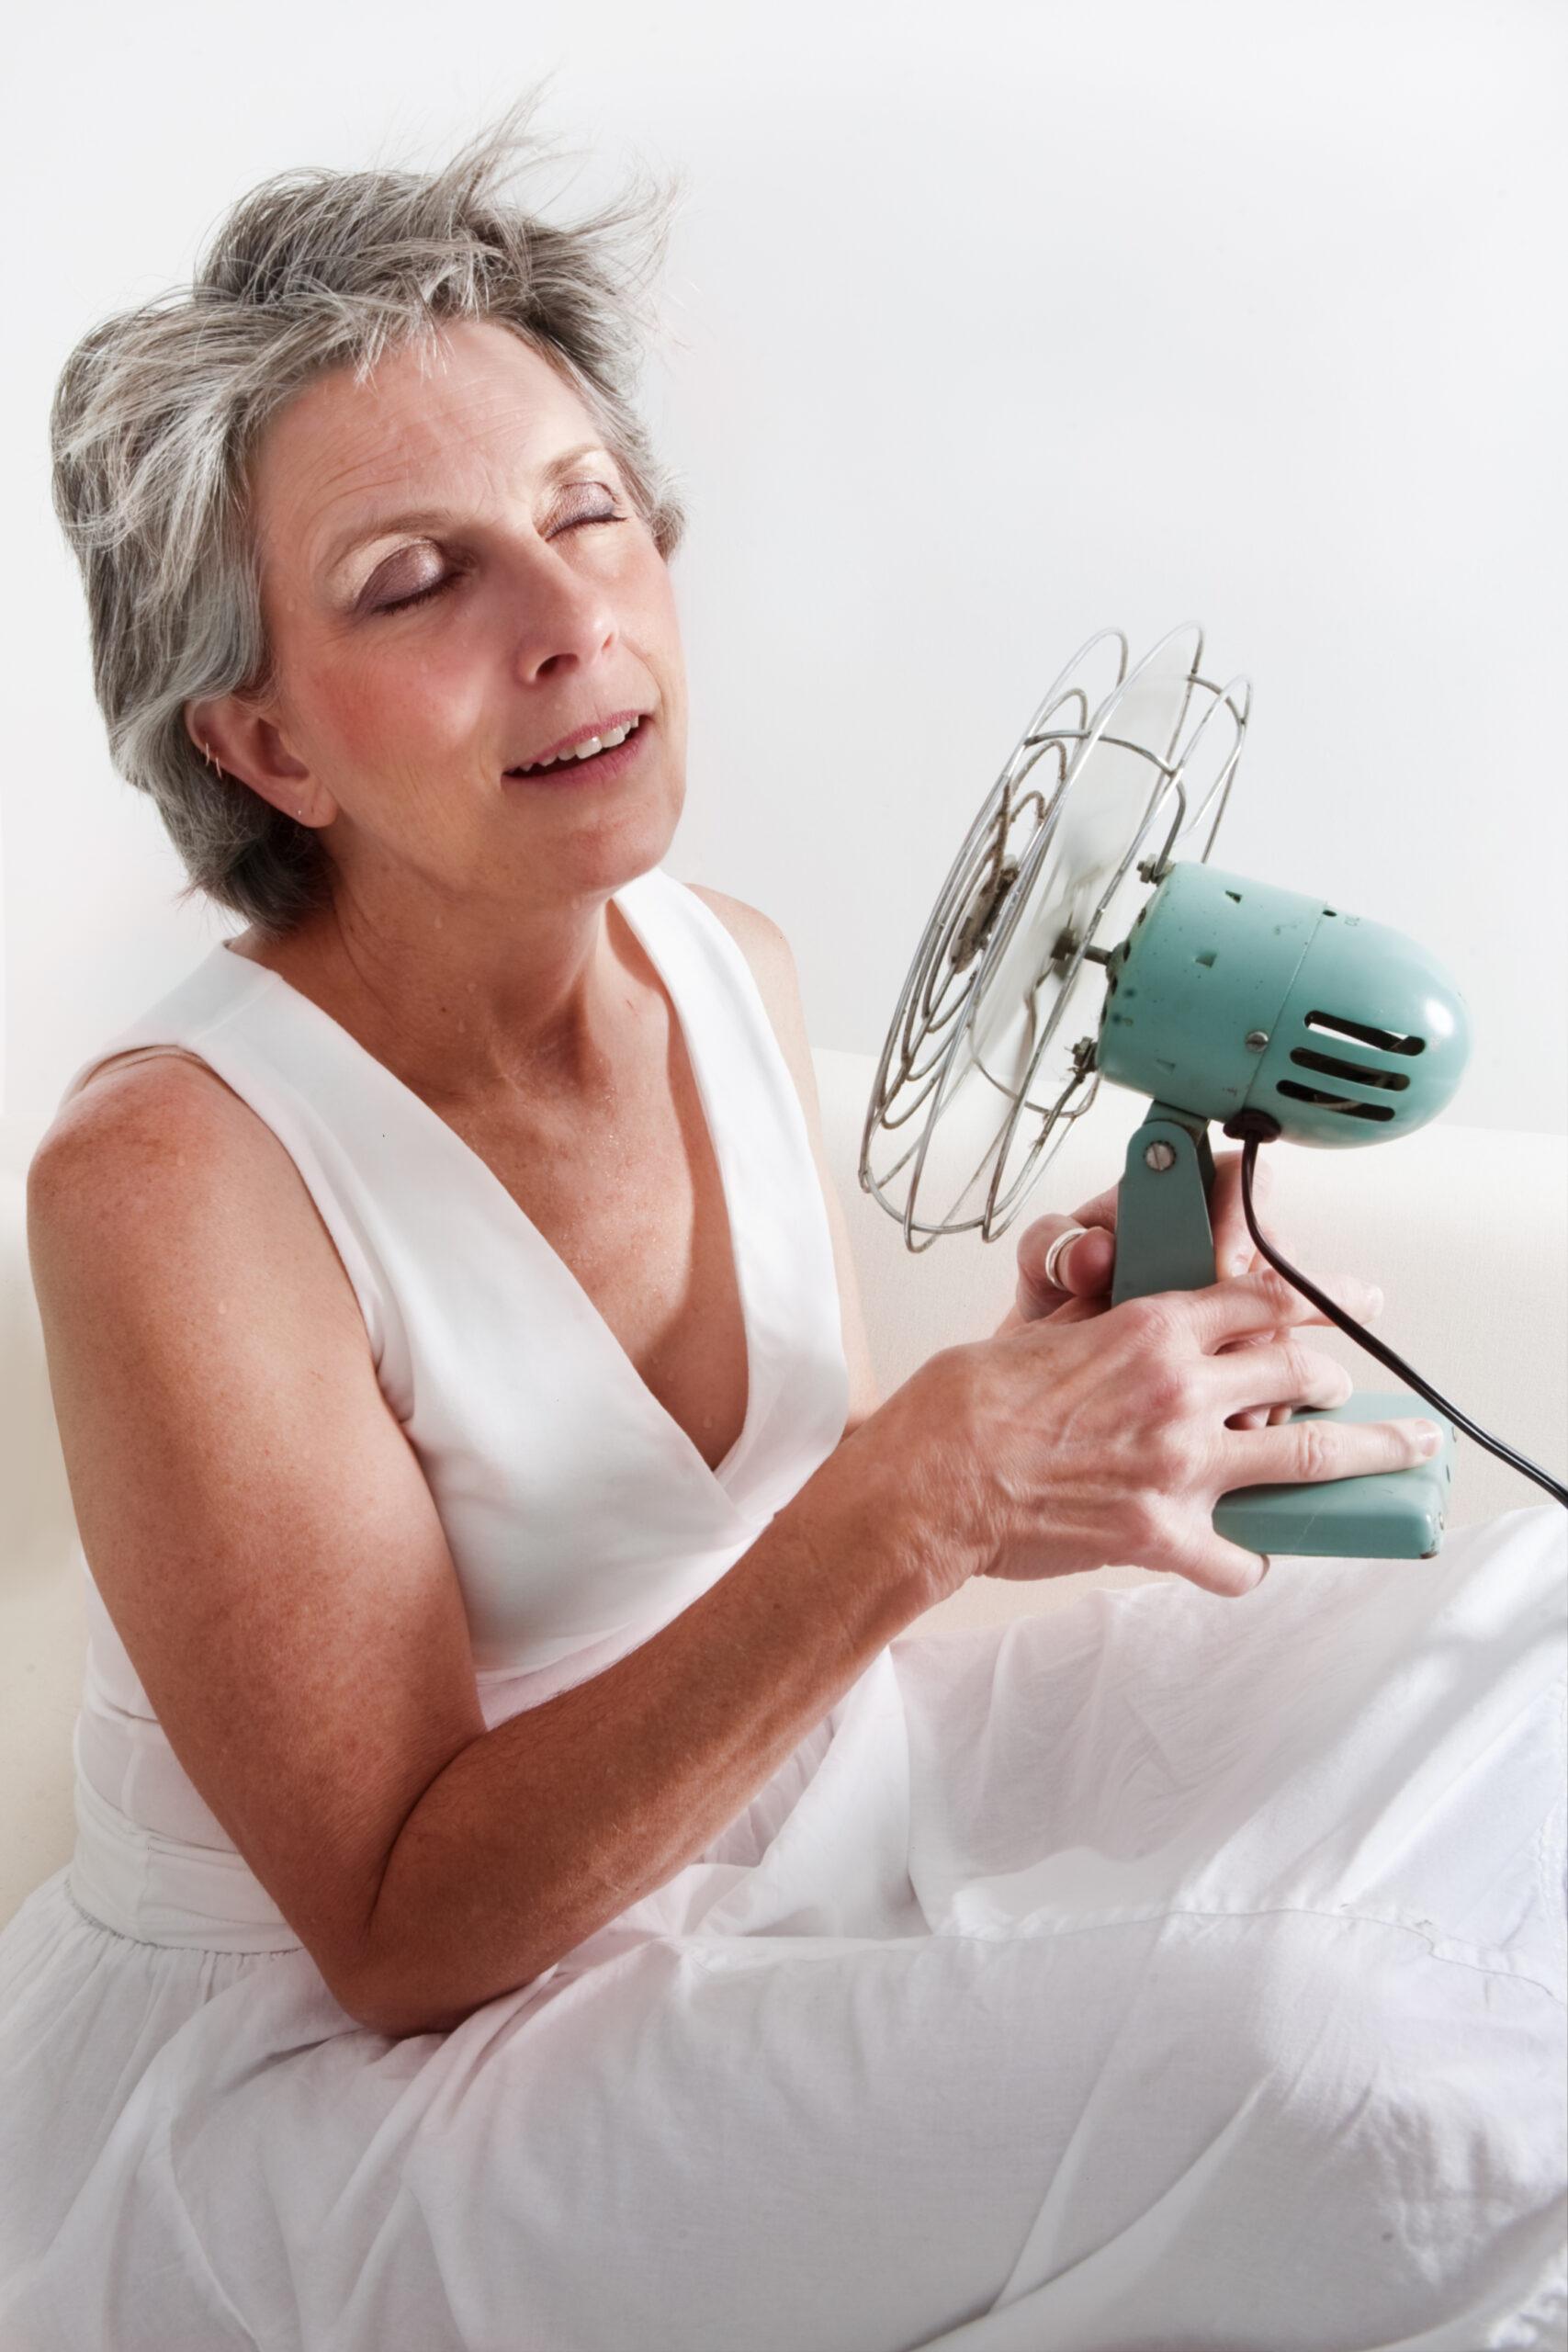 Dealing with Mood and Weight during Menopause